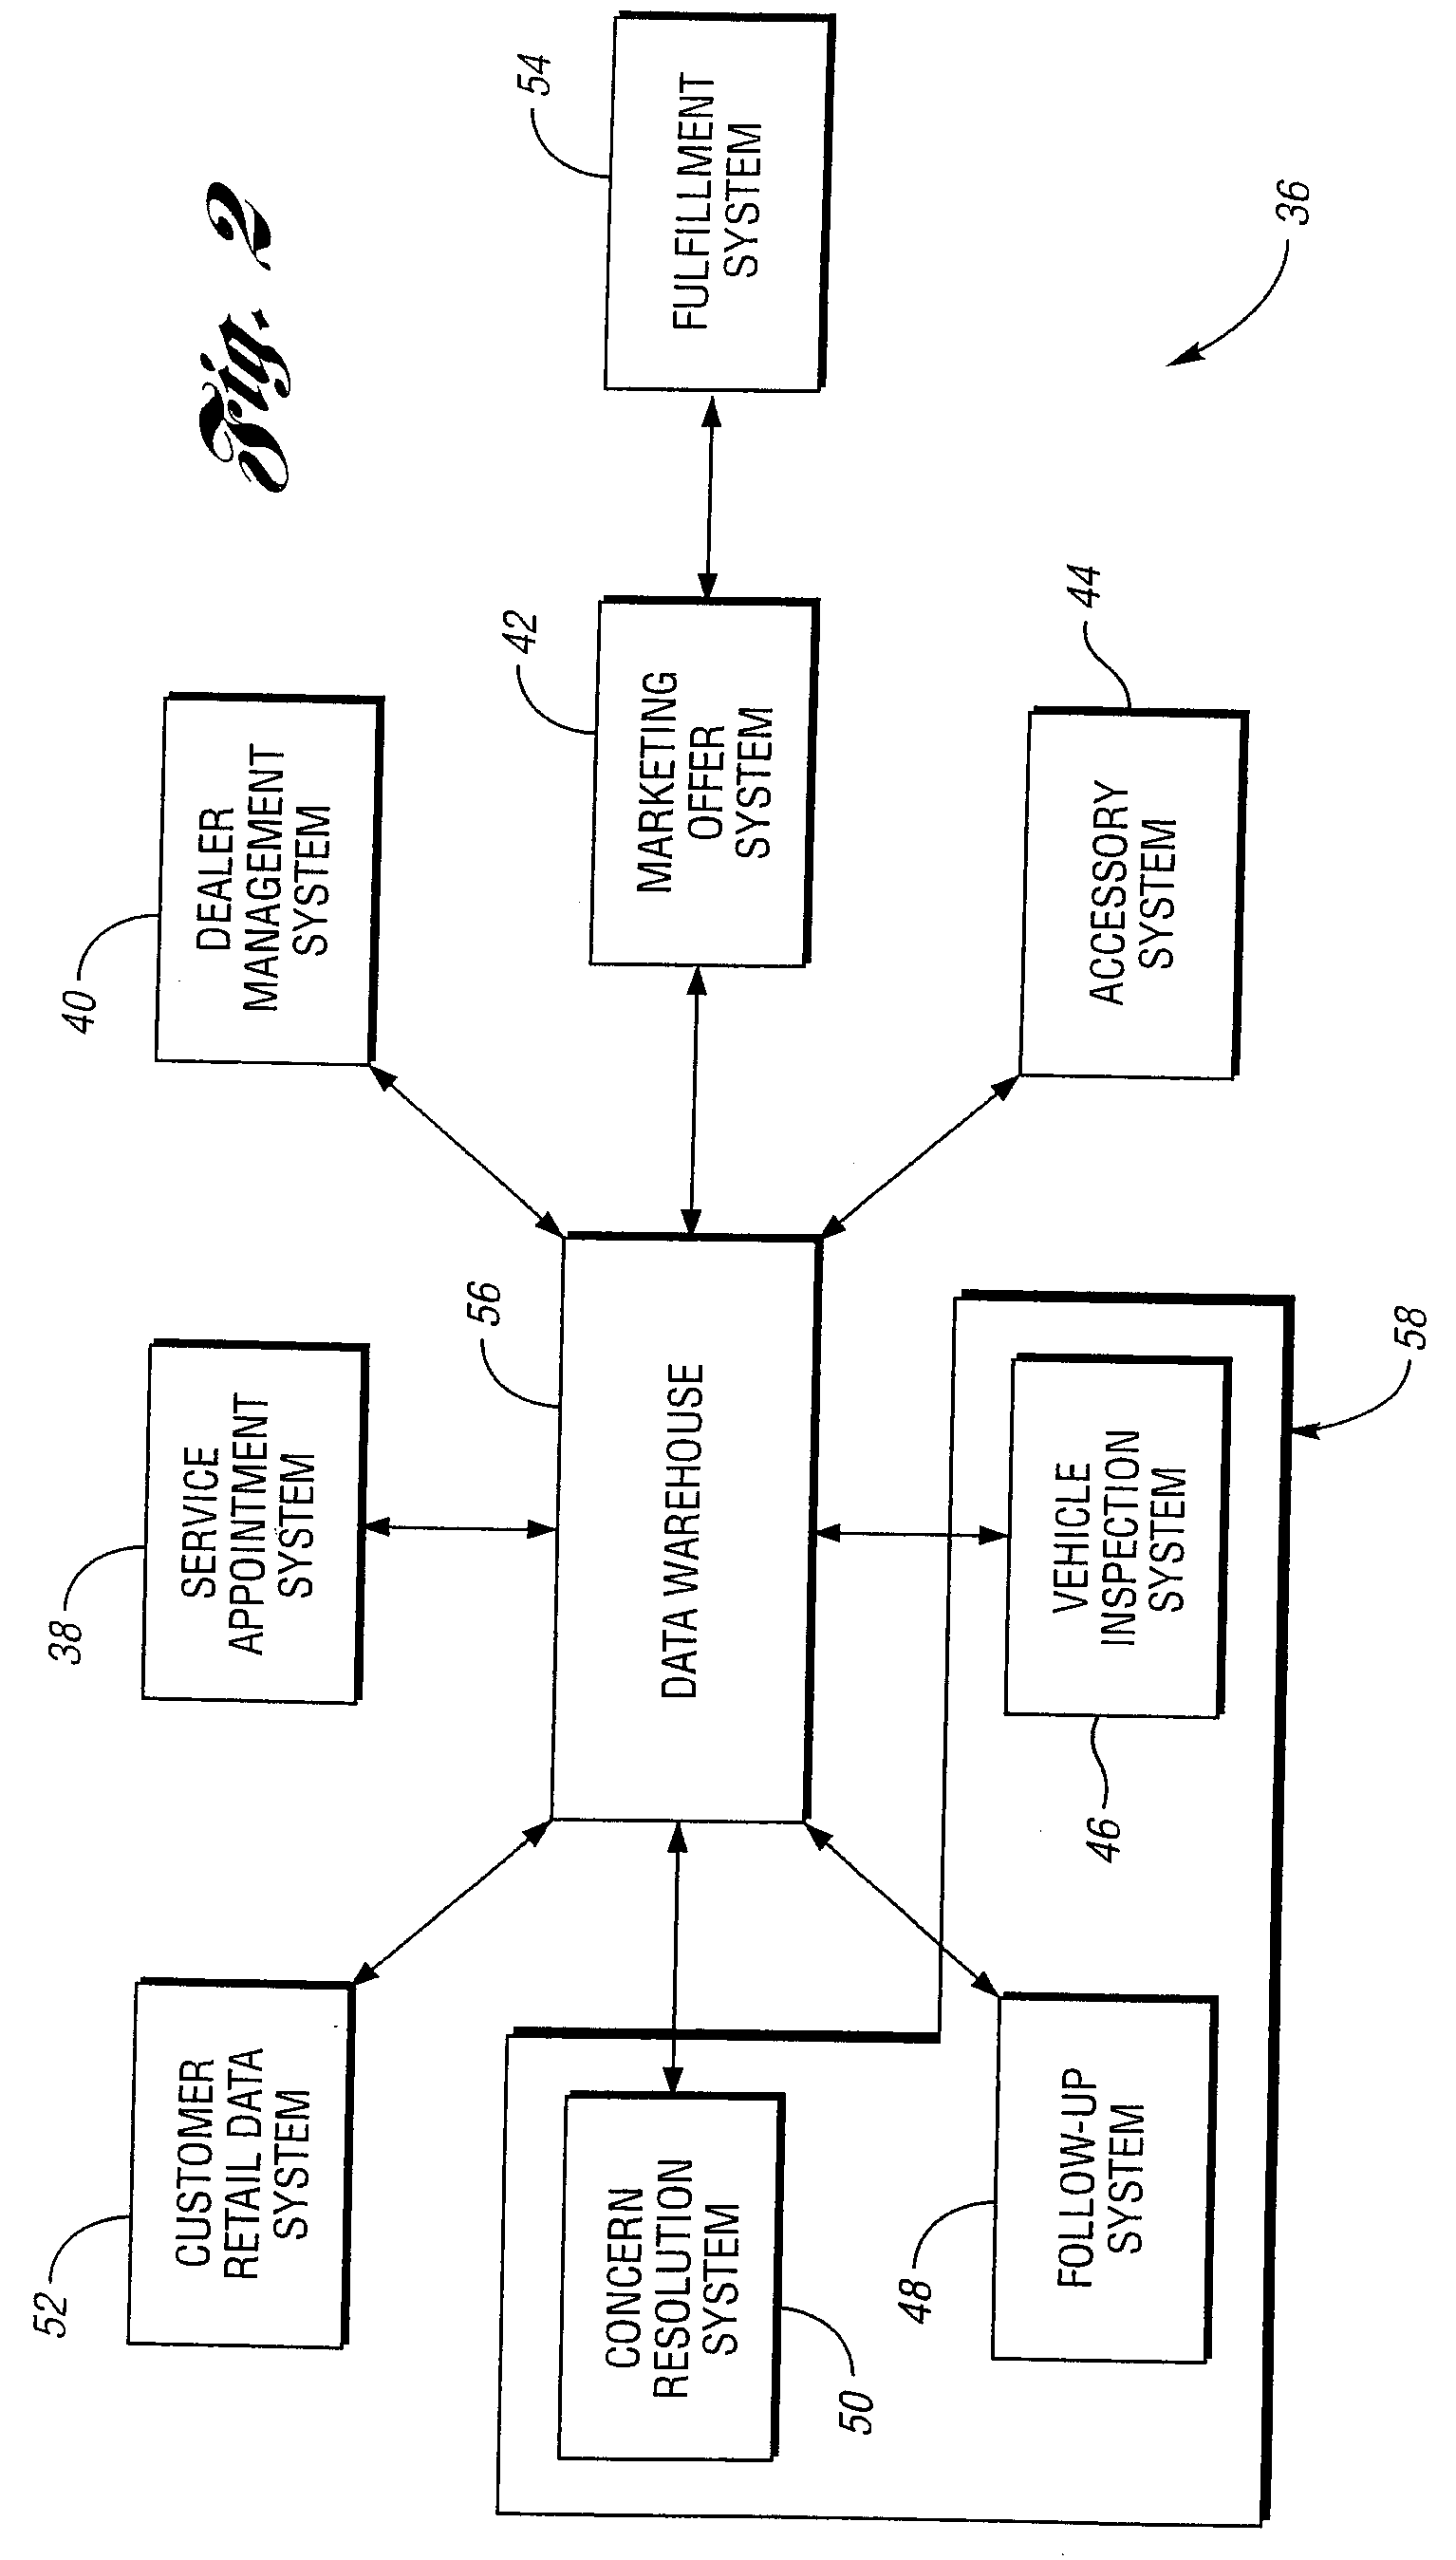 Vehicle sales and service data integration system and method